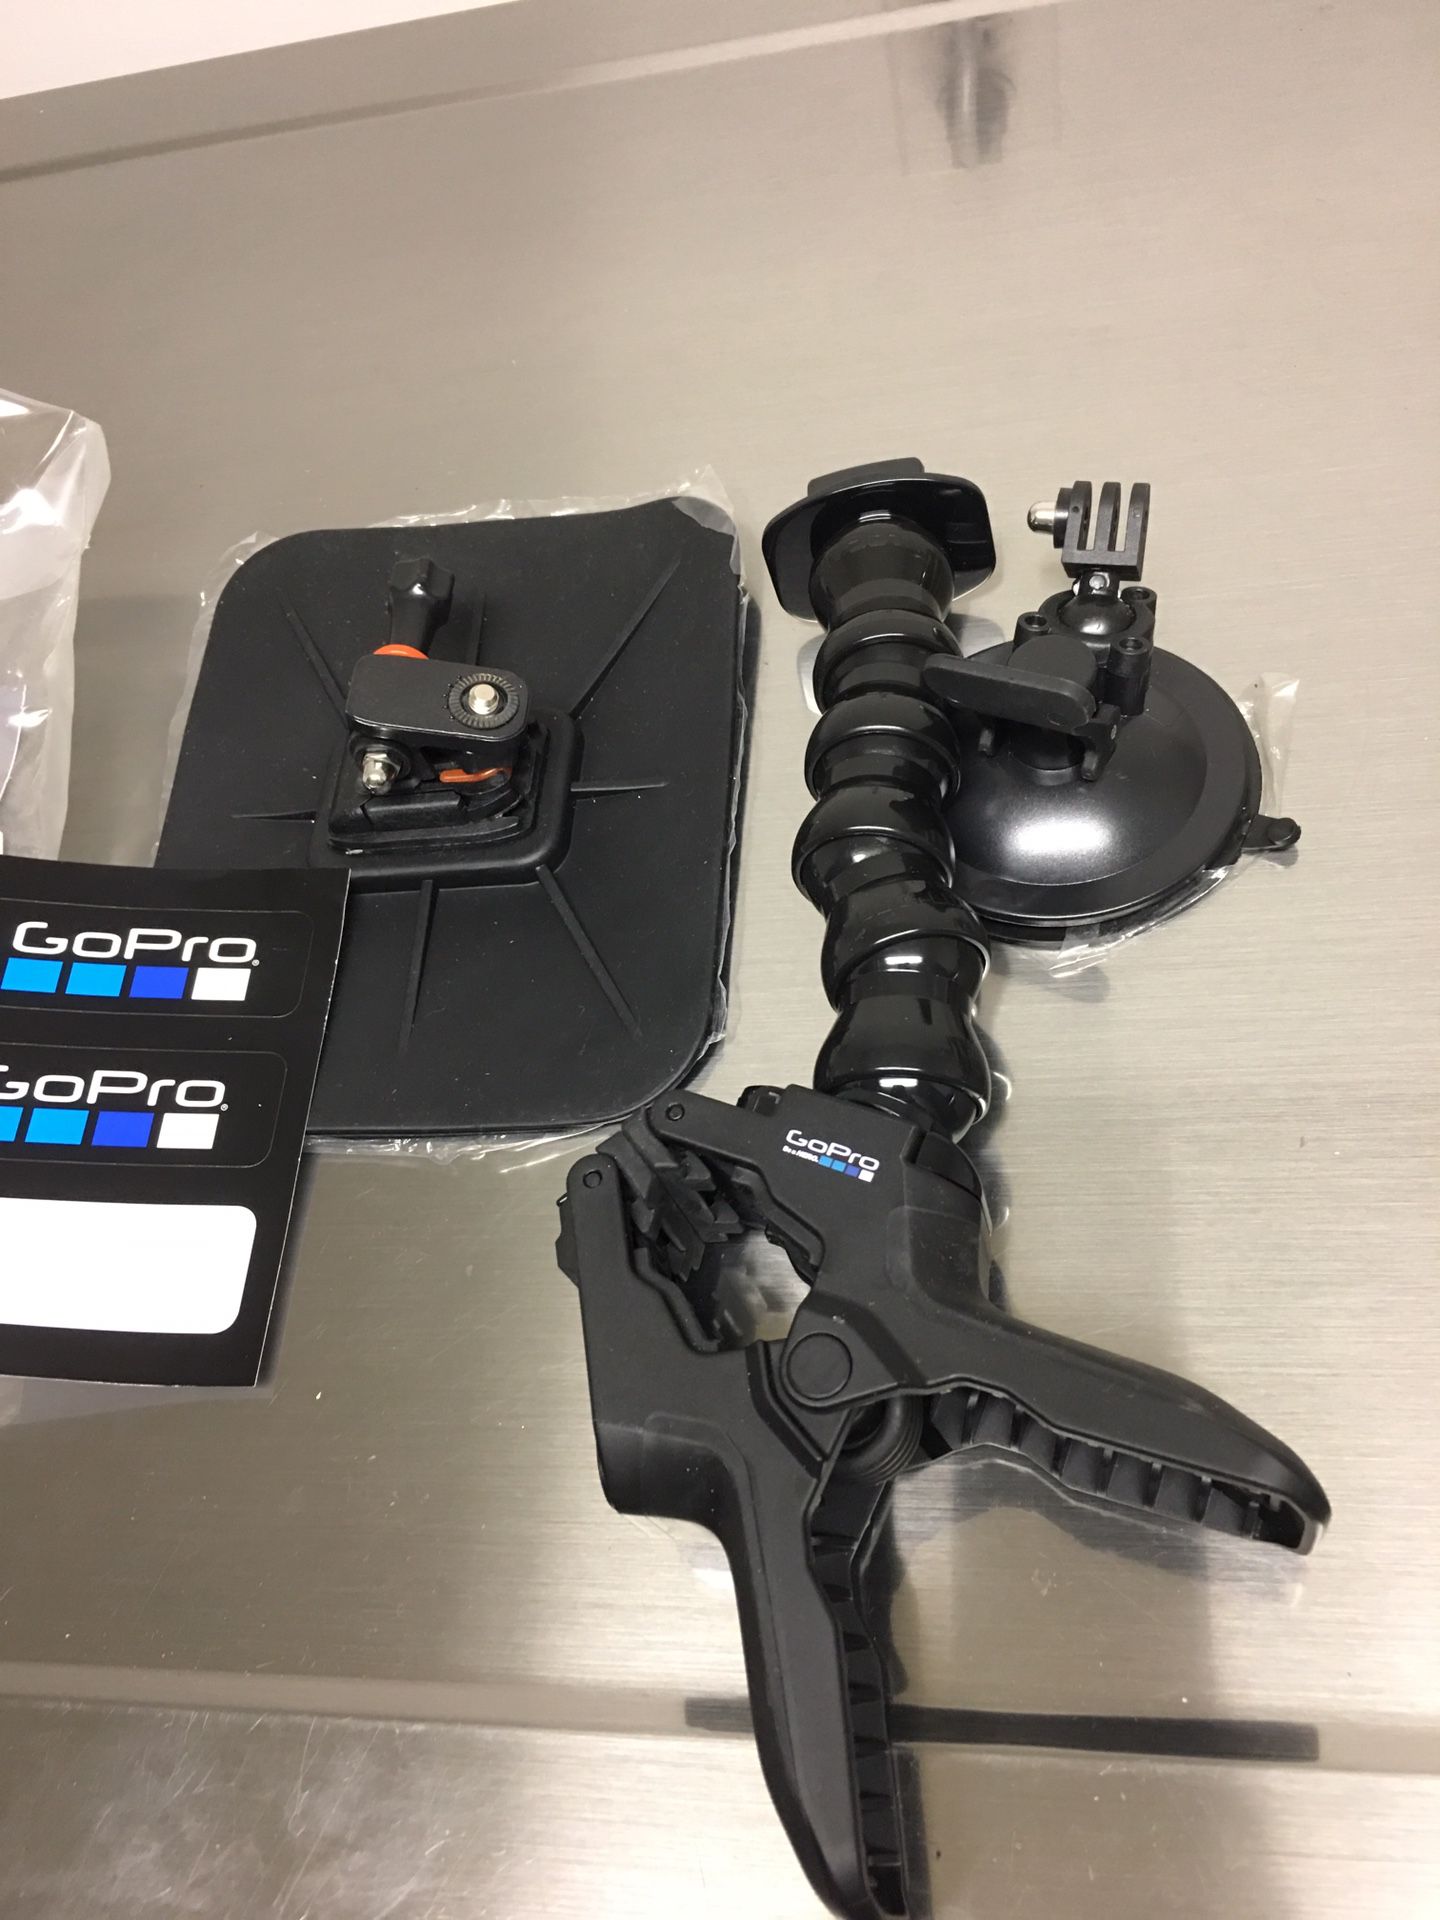 Parts for go pro